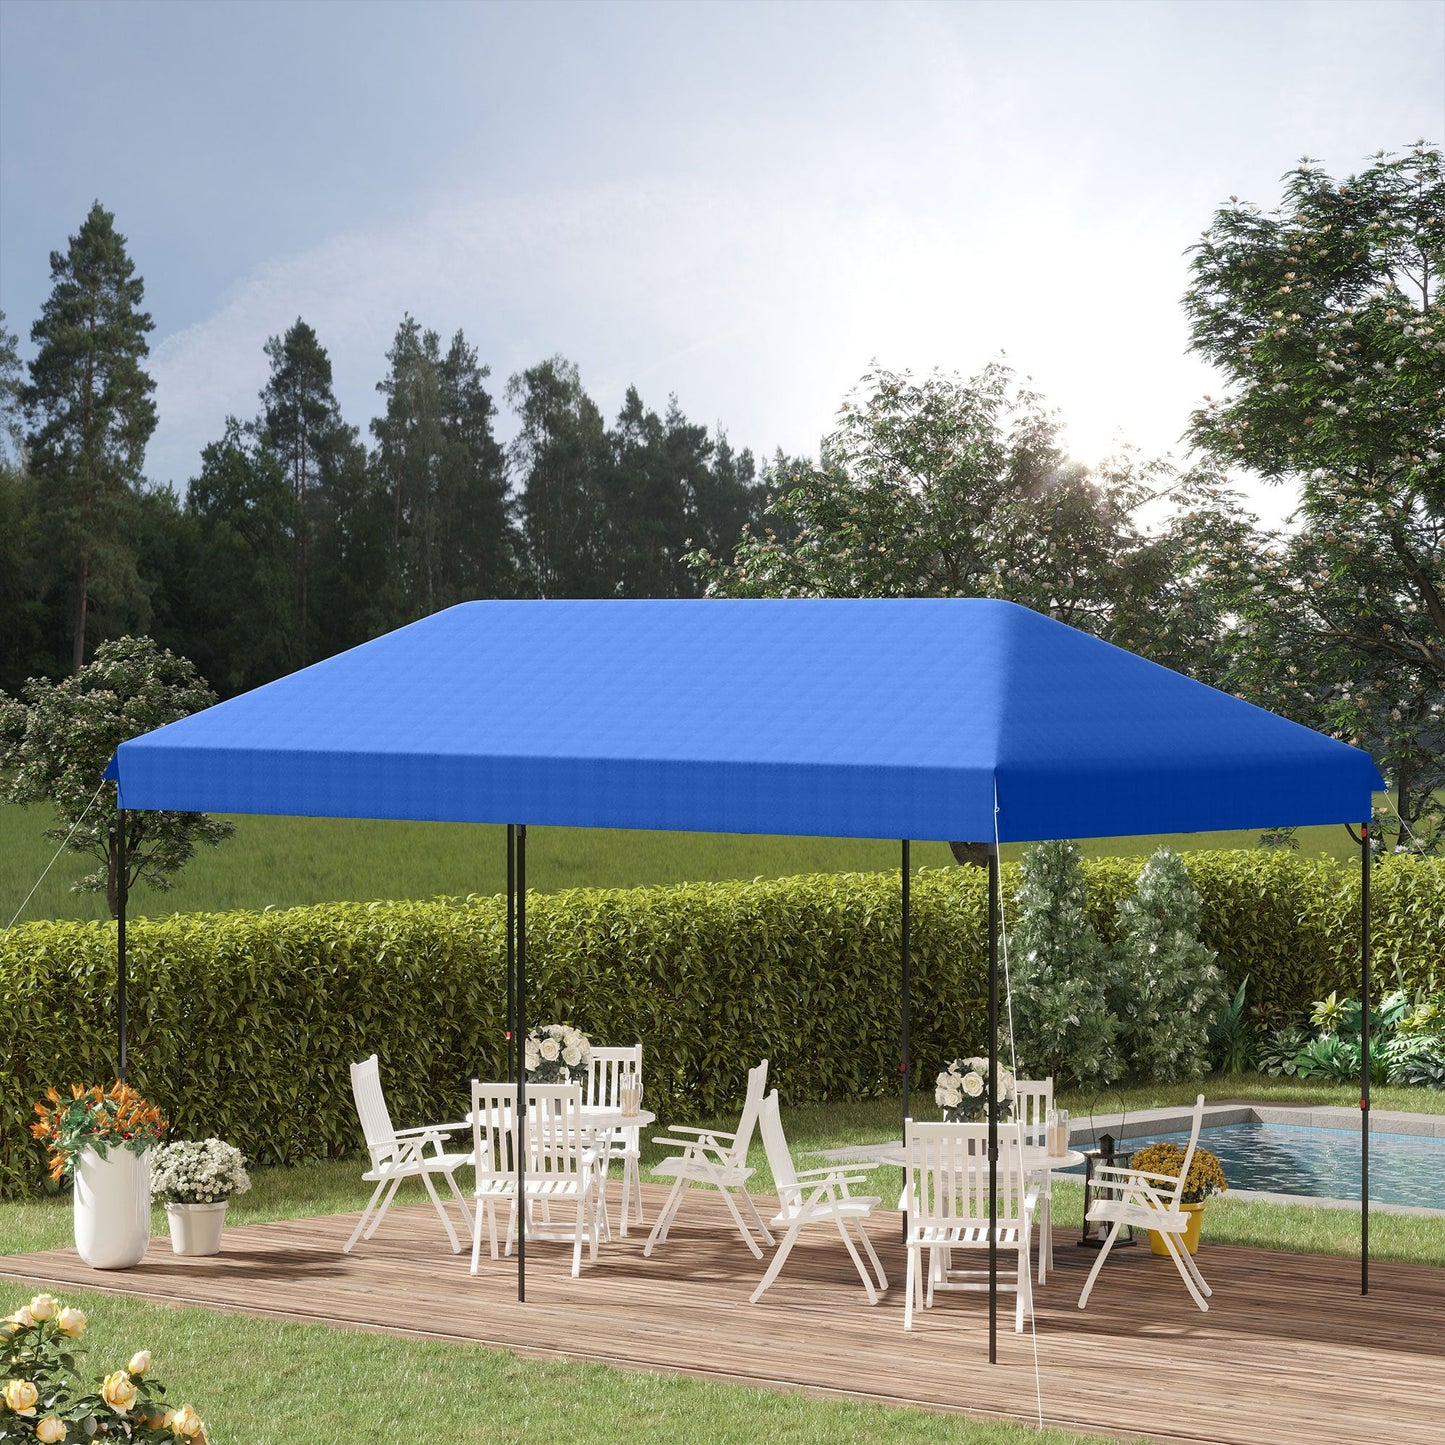 Miscellaneous-10' x 20' Heavy Duty Pop Up Canopy Tent with 3-Level Adjustable Height, Wheeled Roller Bag, UV Fighting Roof, Dark Blue - Outdoor Style Company